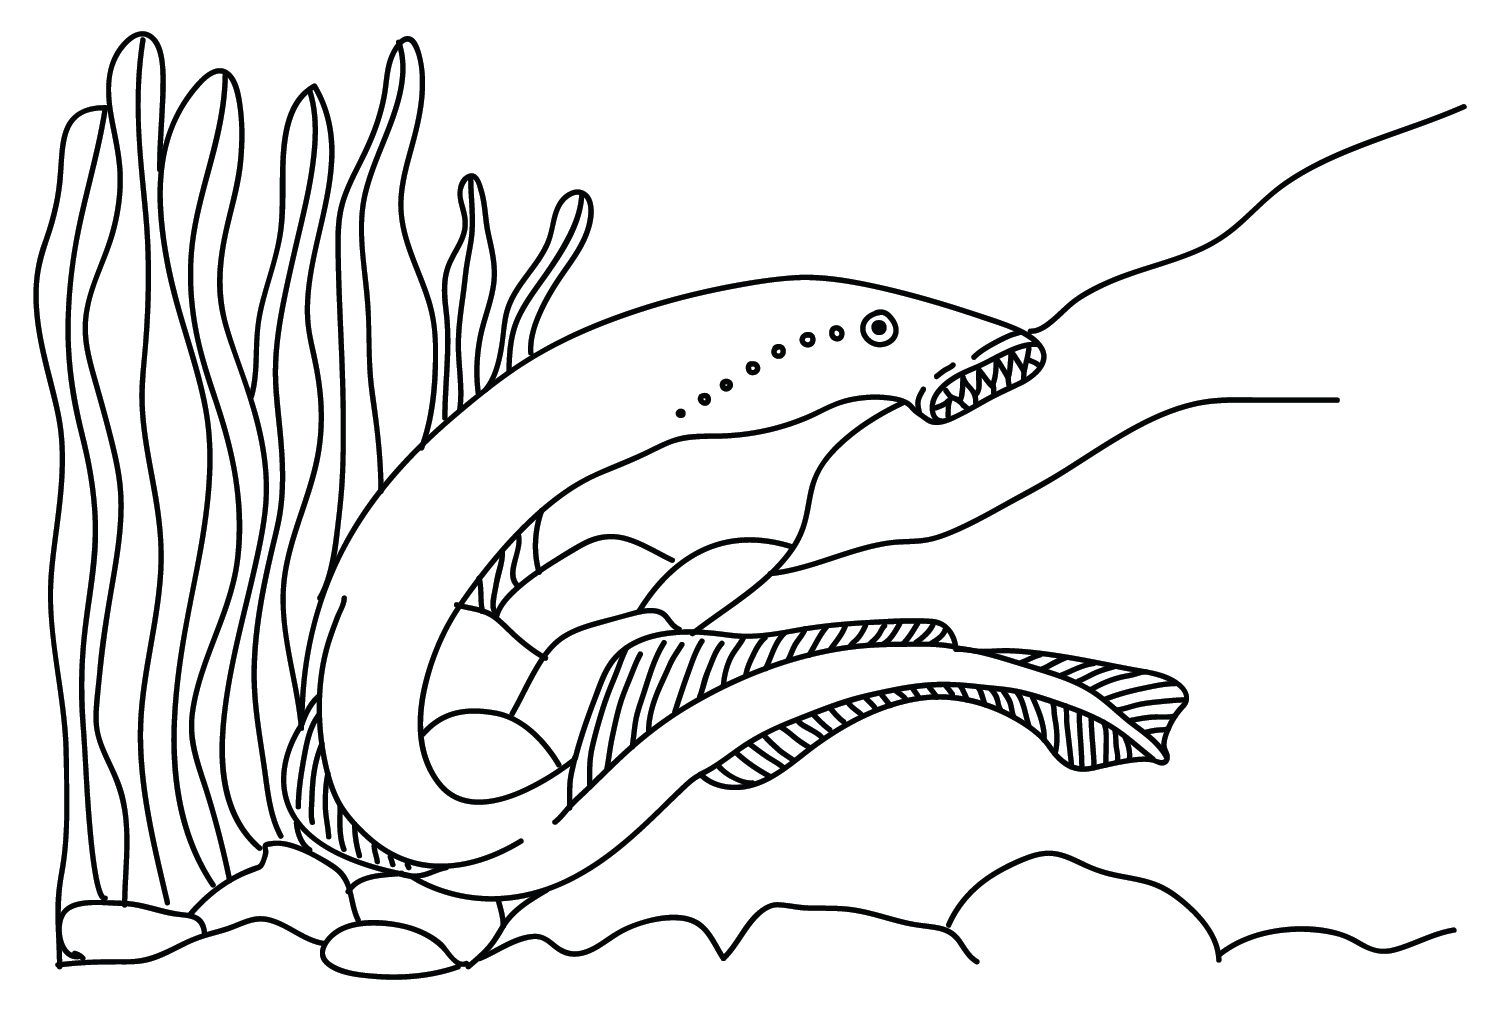 Lamprey Black and White Coloring Page - Free Printable Coloring Pages